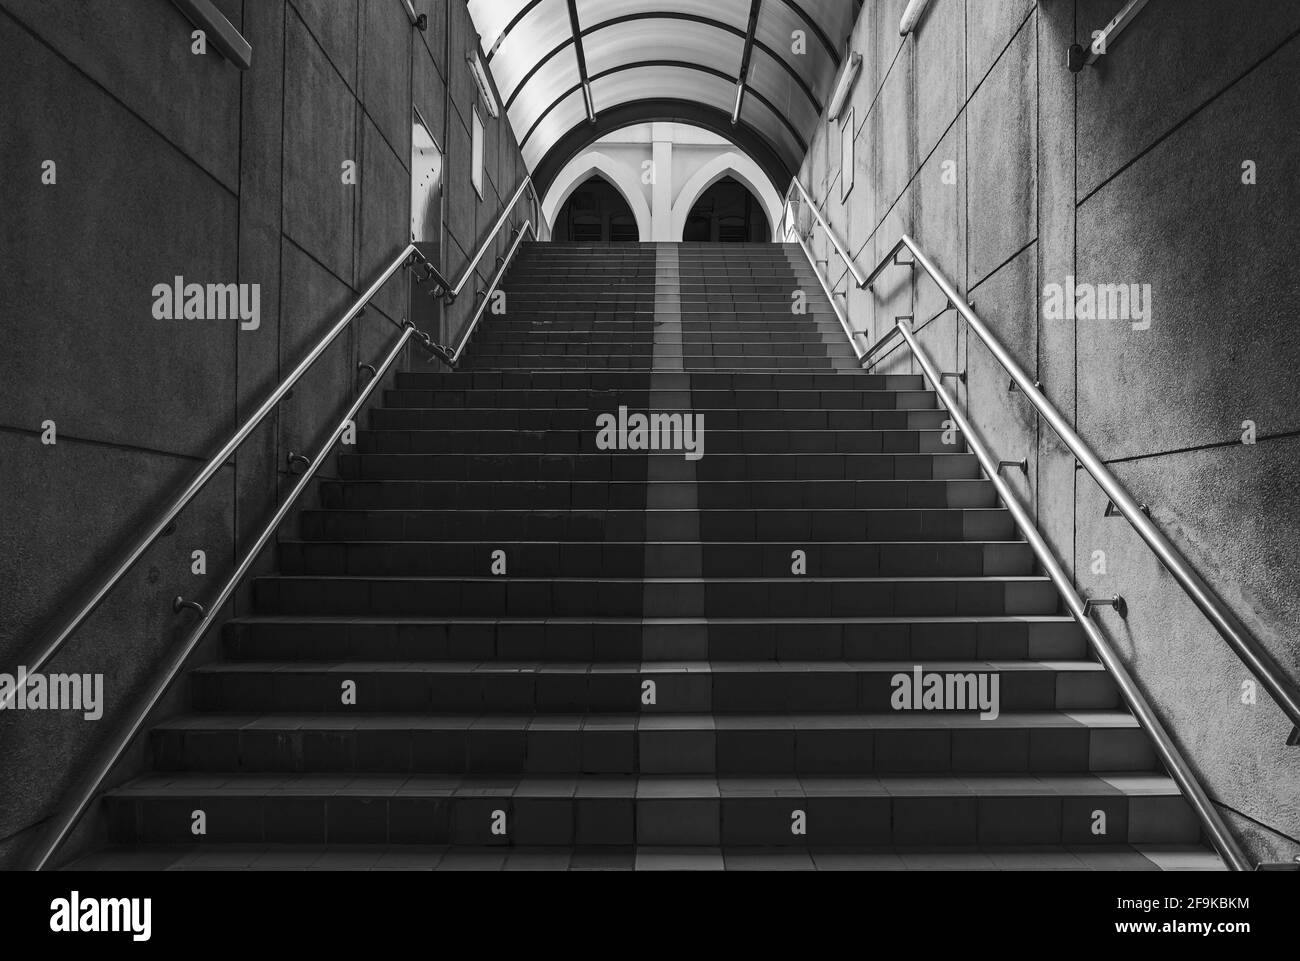 Concrete steps of roofed or covered pedestrian underground underpass tunnel under a road, street or highway, in black and white Stock Photo